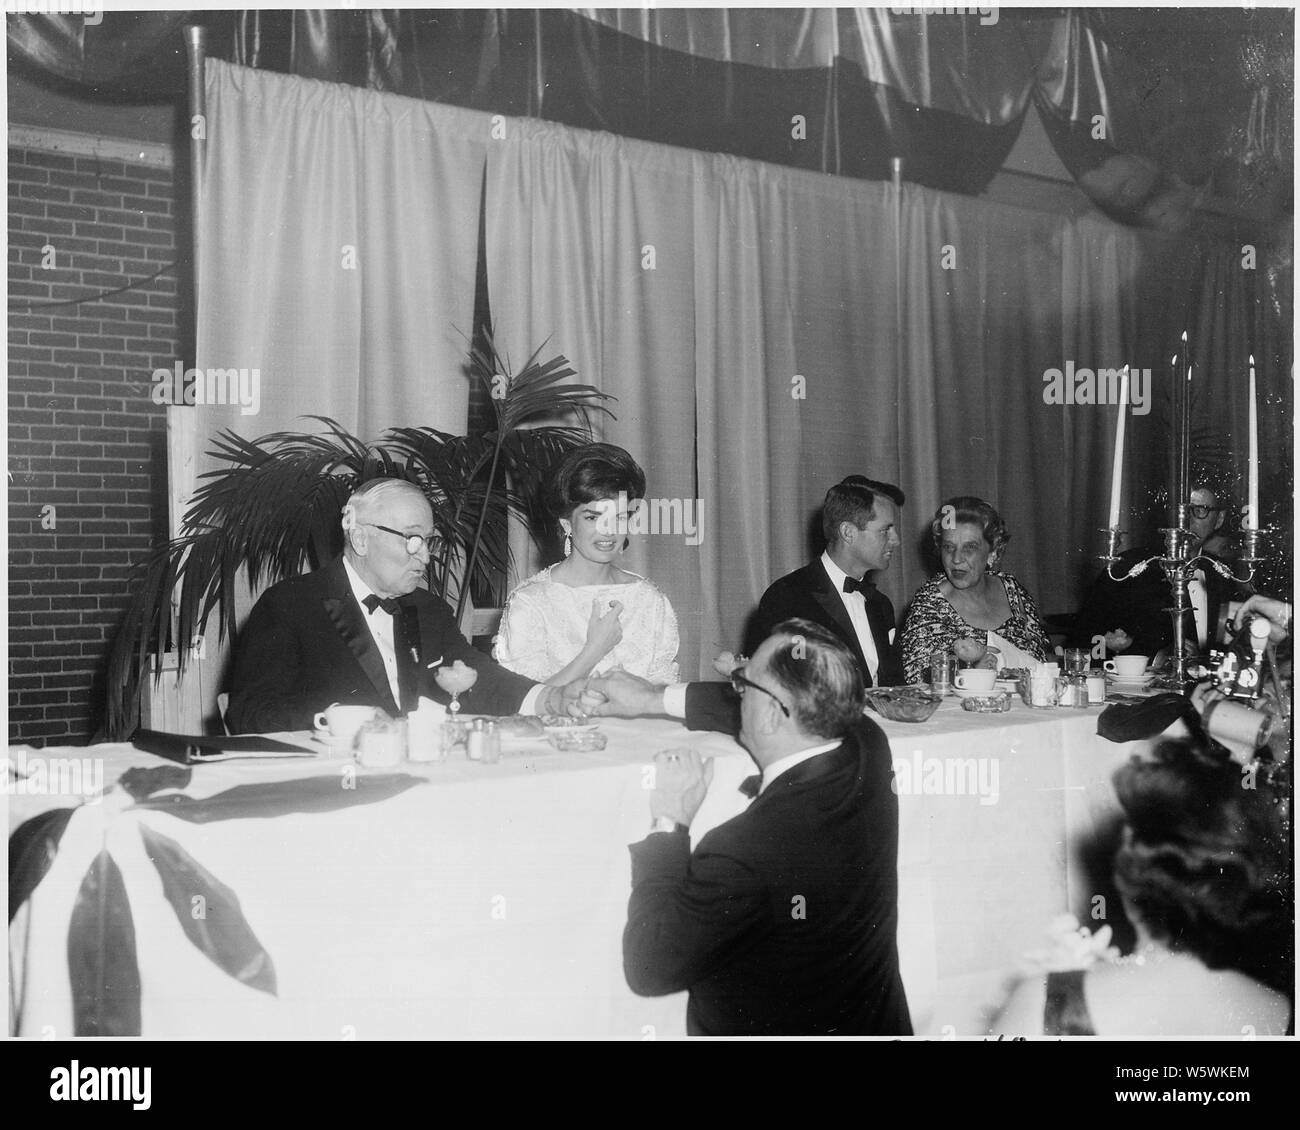 Photograph of former President Harry S. Truman greeting an admirer during an Inaugural Anniversary Dinner at the National Guard Armory in Washington; he is seated beside First Lady Jacqueline Bouvier Kennedy and Attorney General Robert F. Kennedy. Stock Photo